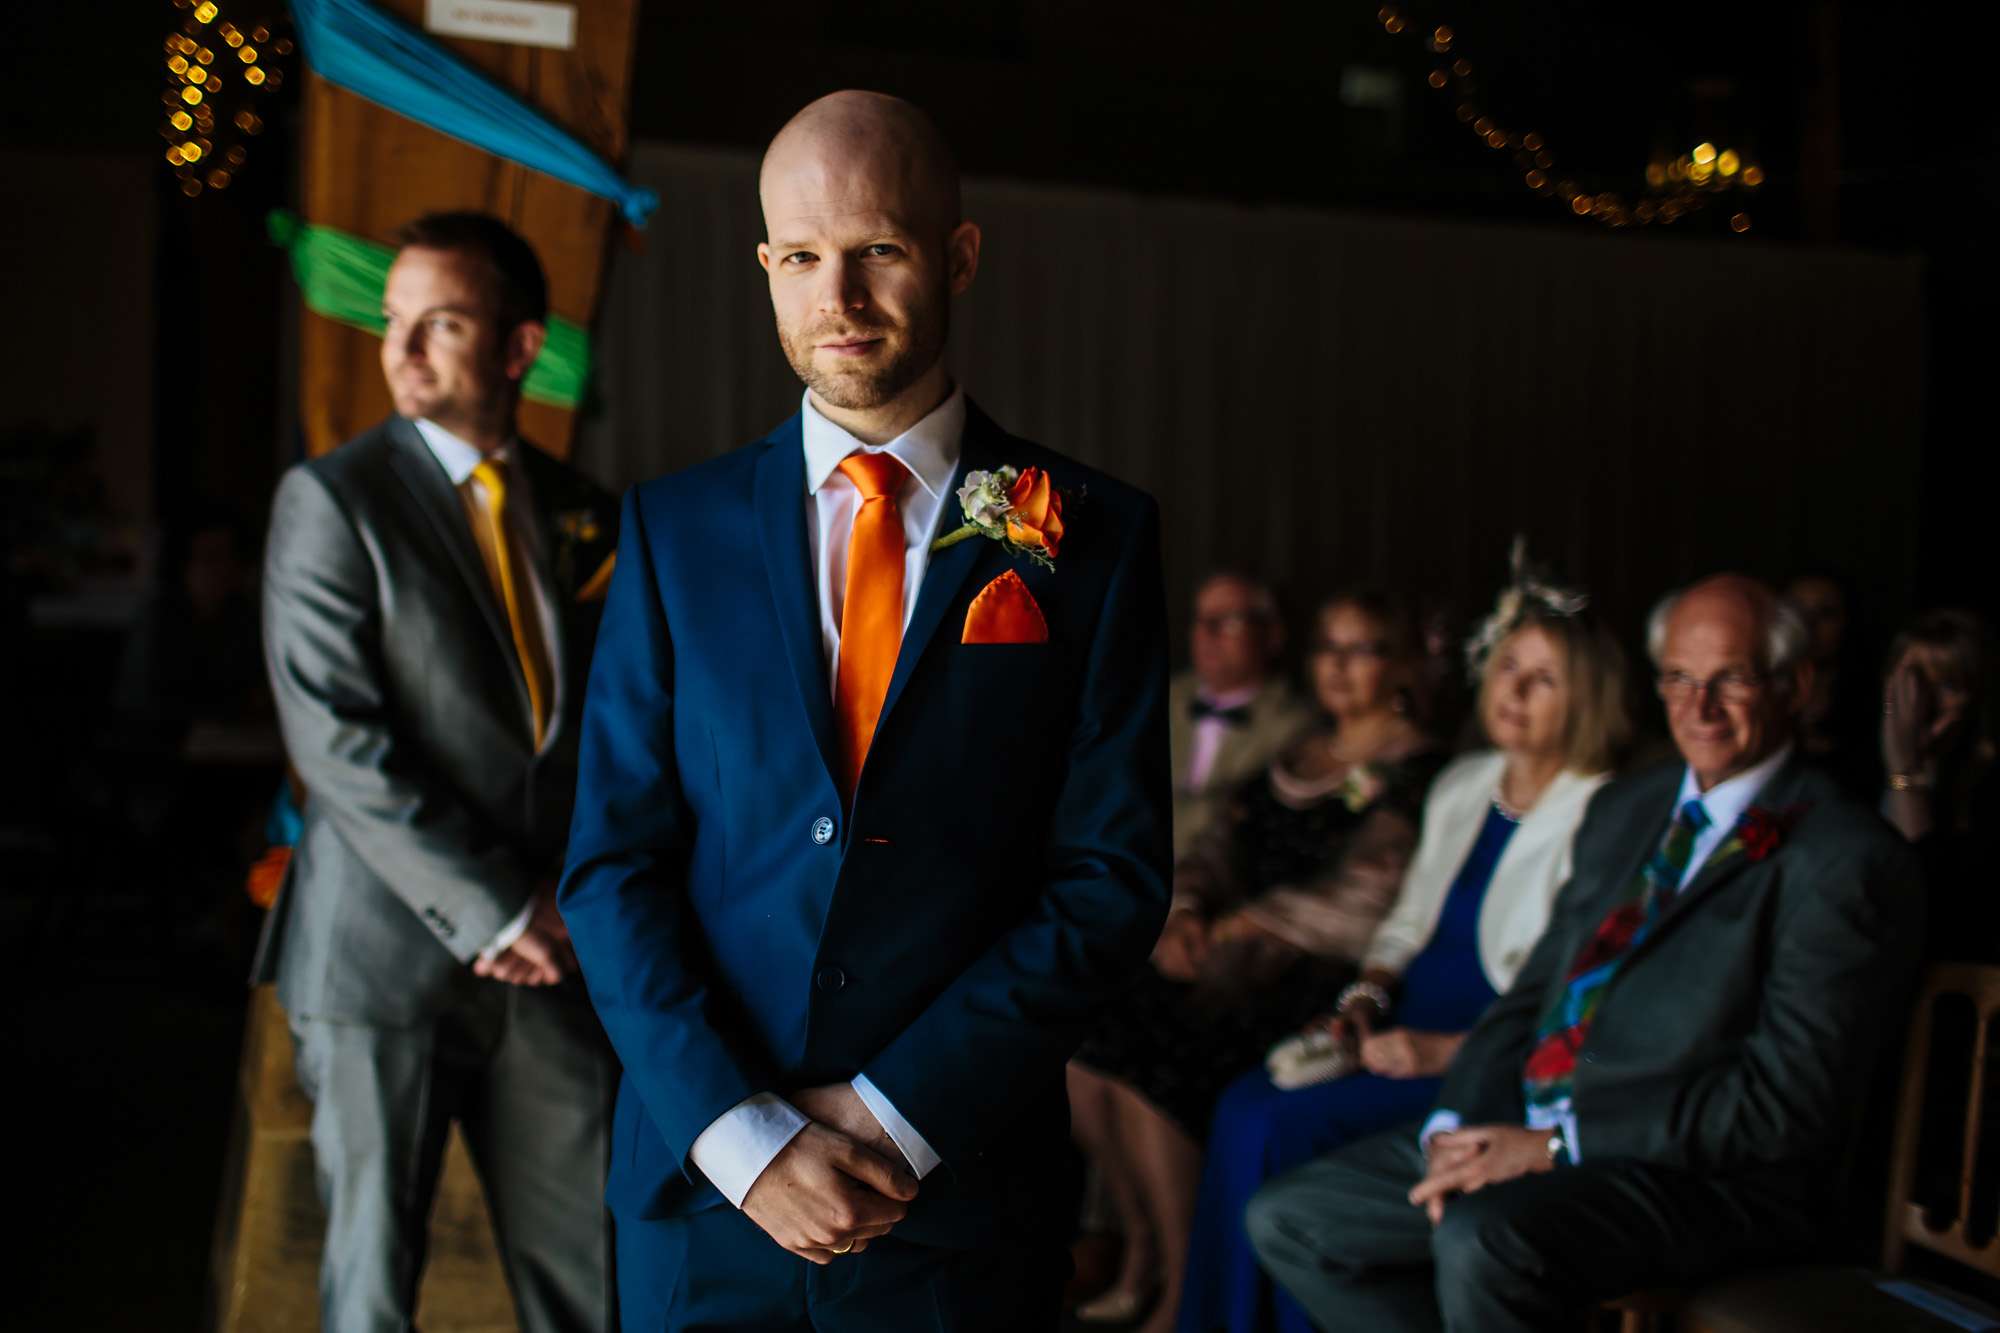 Groom awaiting his bride at a Yorkshire wedding